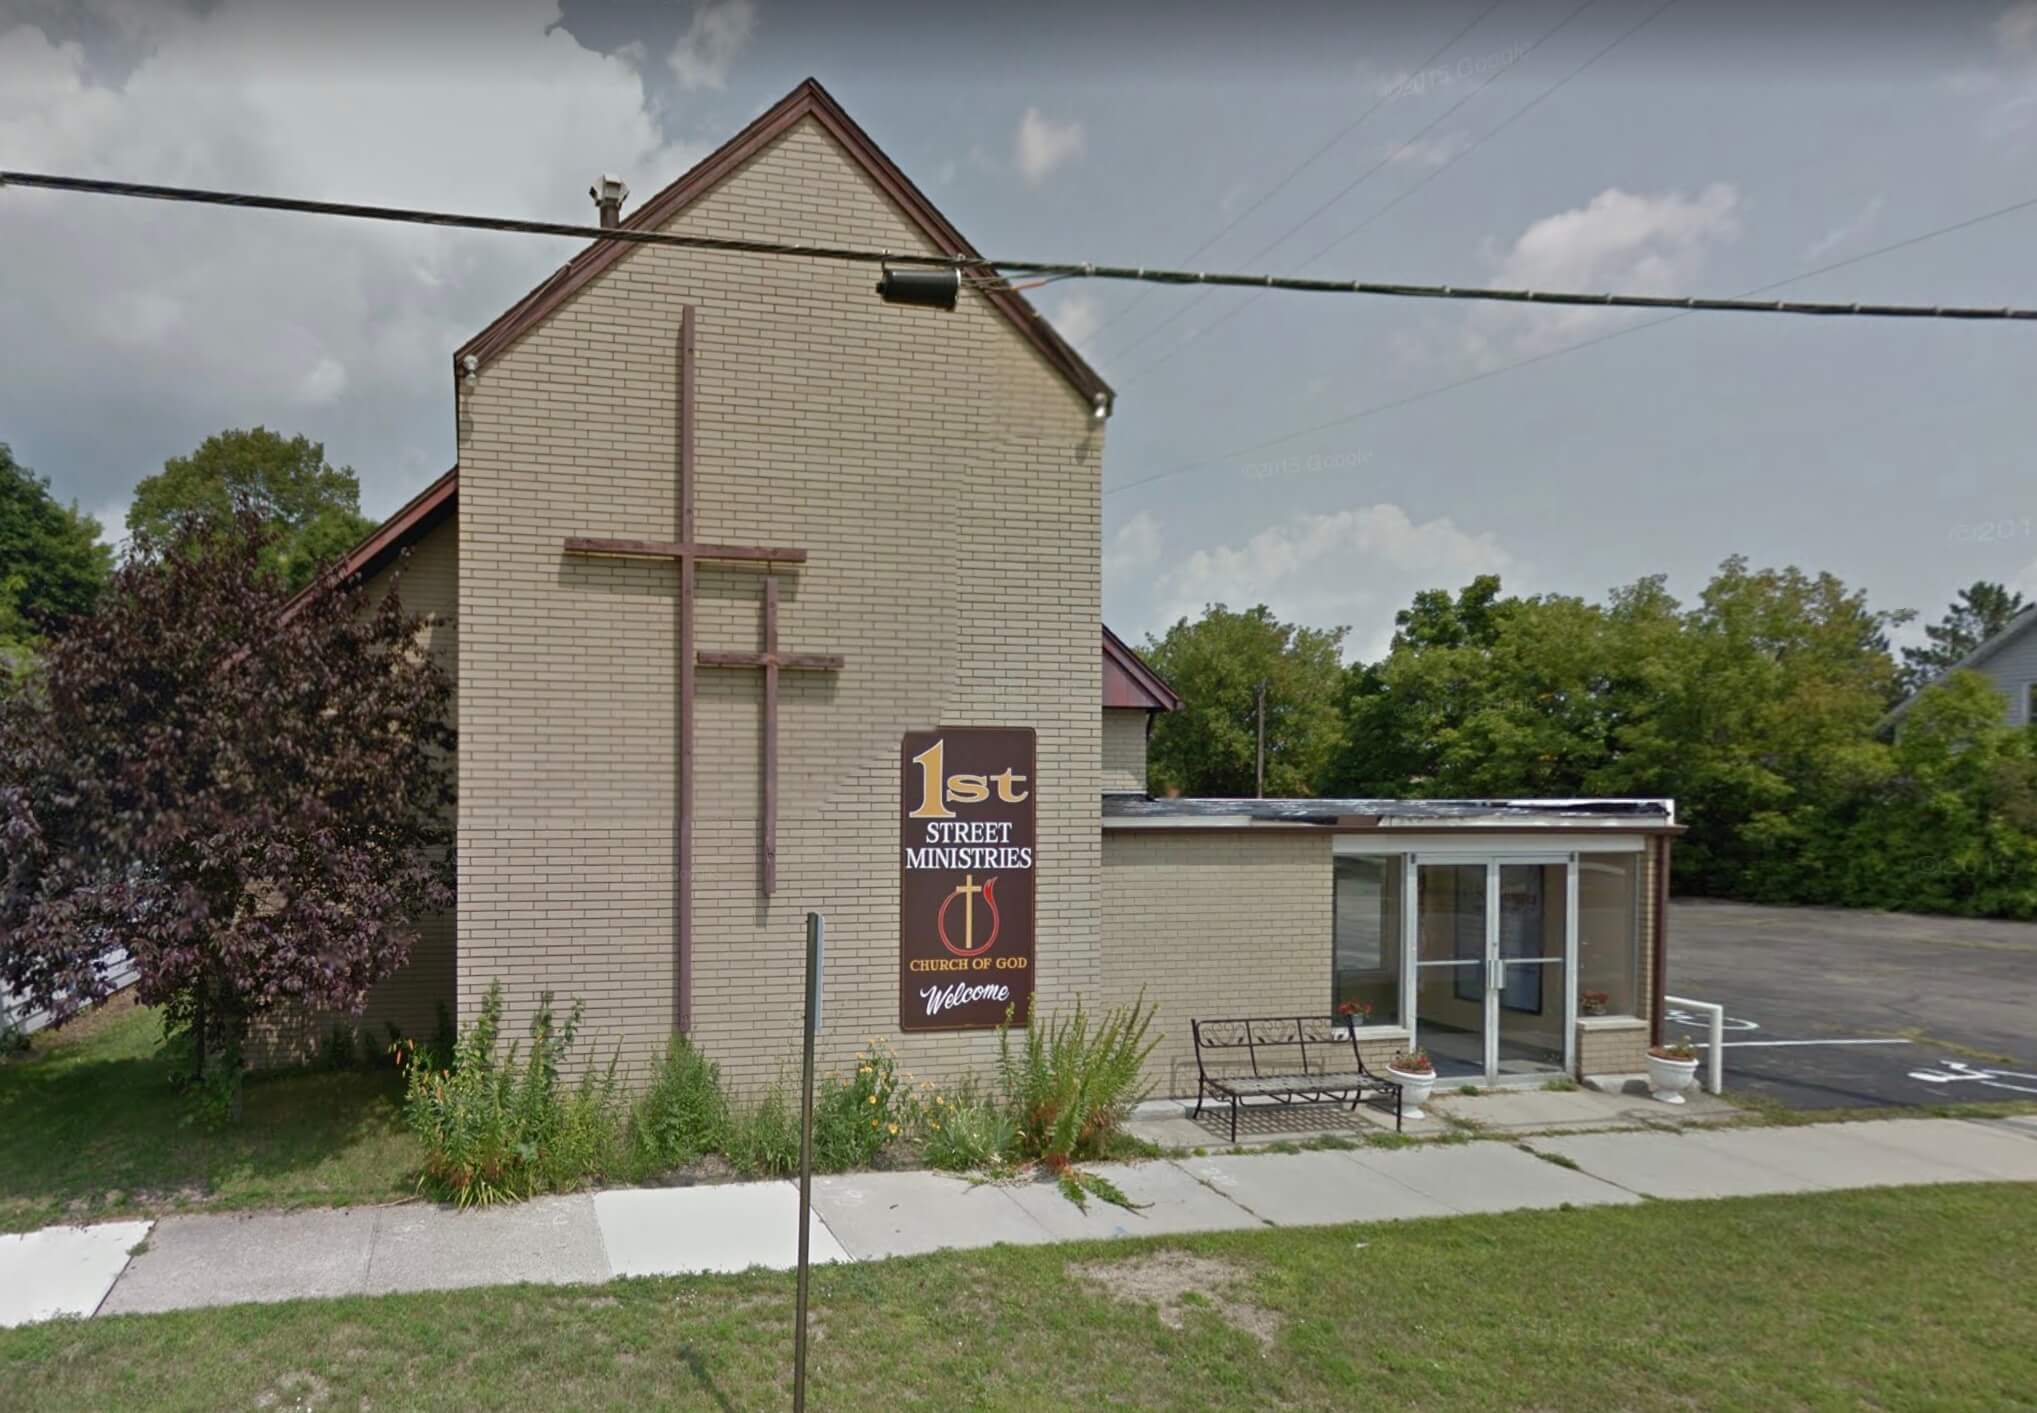 First Street Ministries Church Of God - 100 W 1st St, Gladwin, Michigan 48624 | Real Estate Professional Services